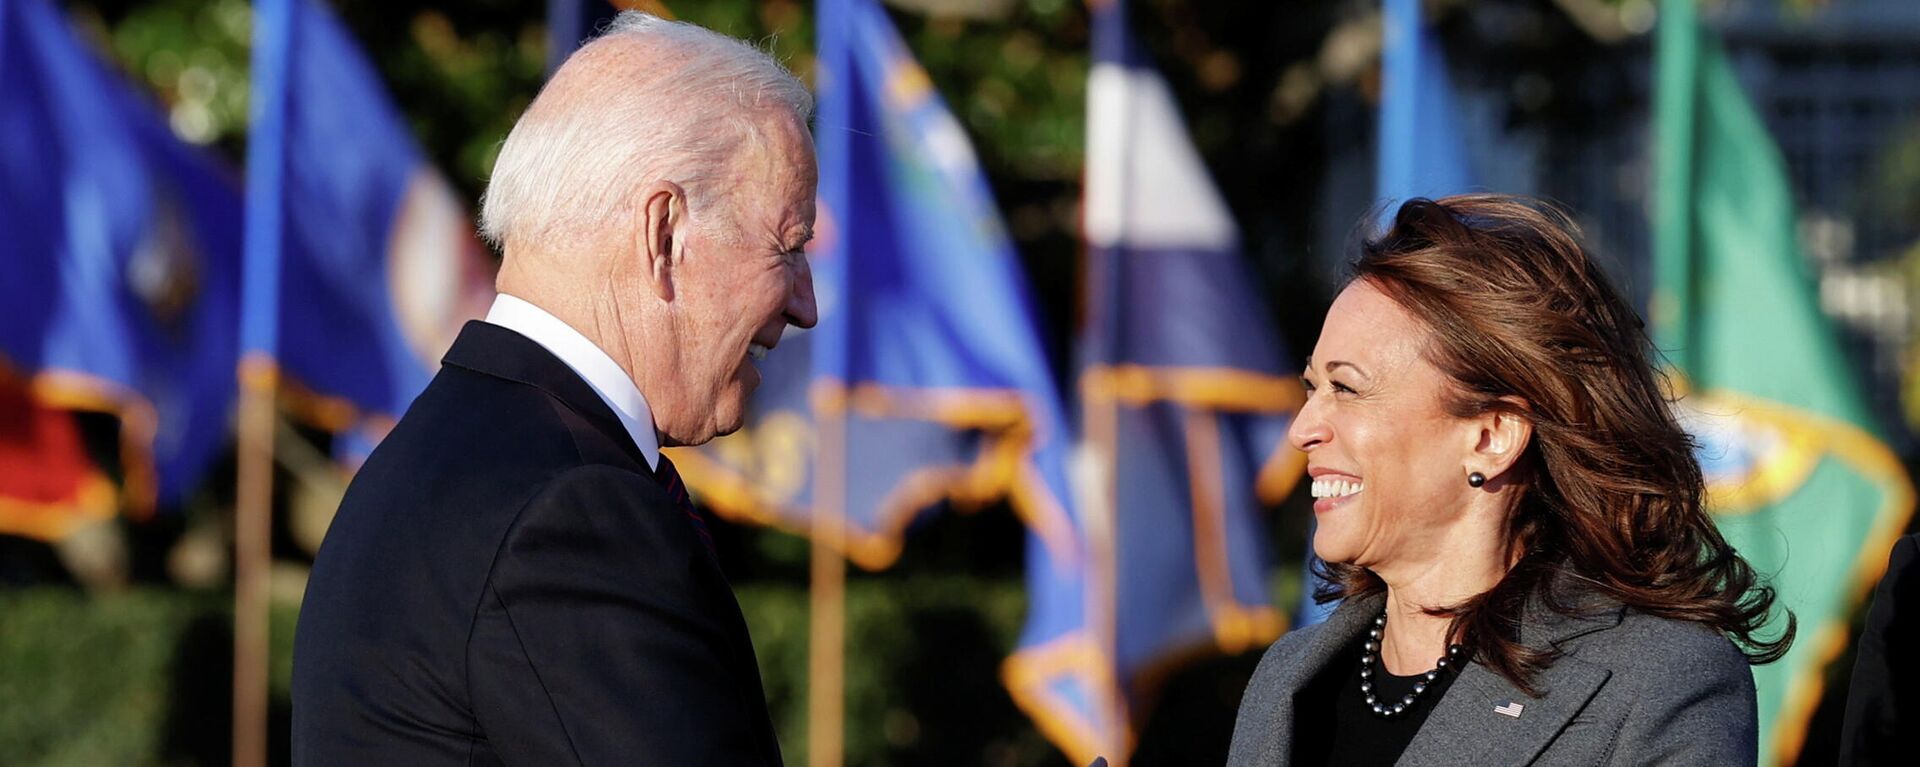 U.S. President Joe Biden and Vice-President Kamala Harris shake hands during a ceremony to sign the Infrastructure Investment and Jobs Act, on the South Lawn at the White House in Washington, U.S., November 15, 2021 - Sputnik International, 1920, 23.03.2022